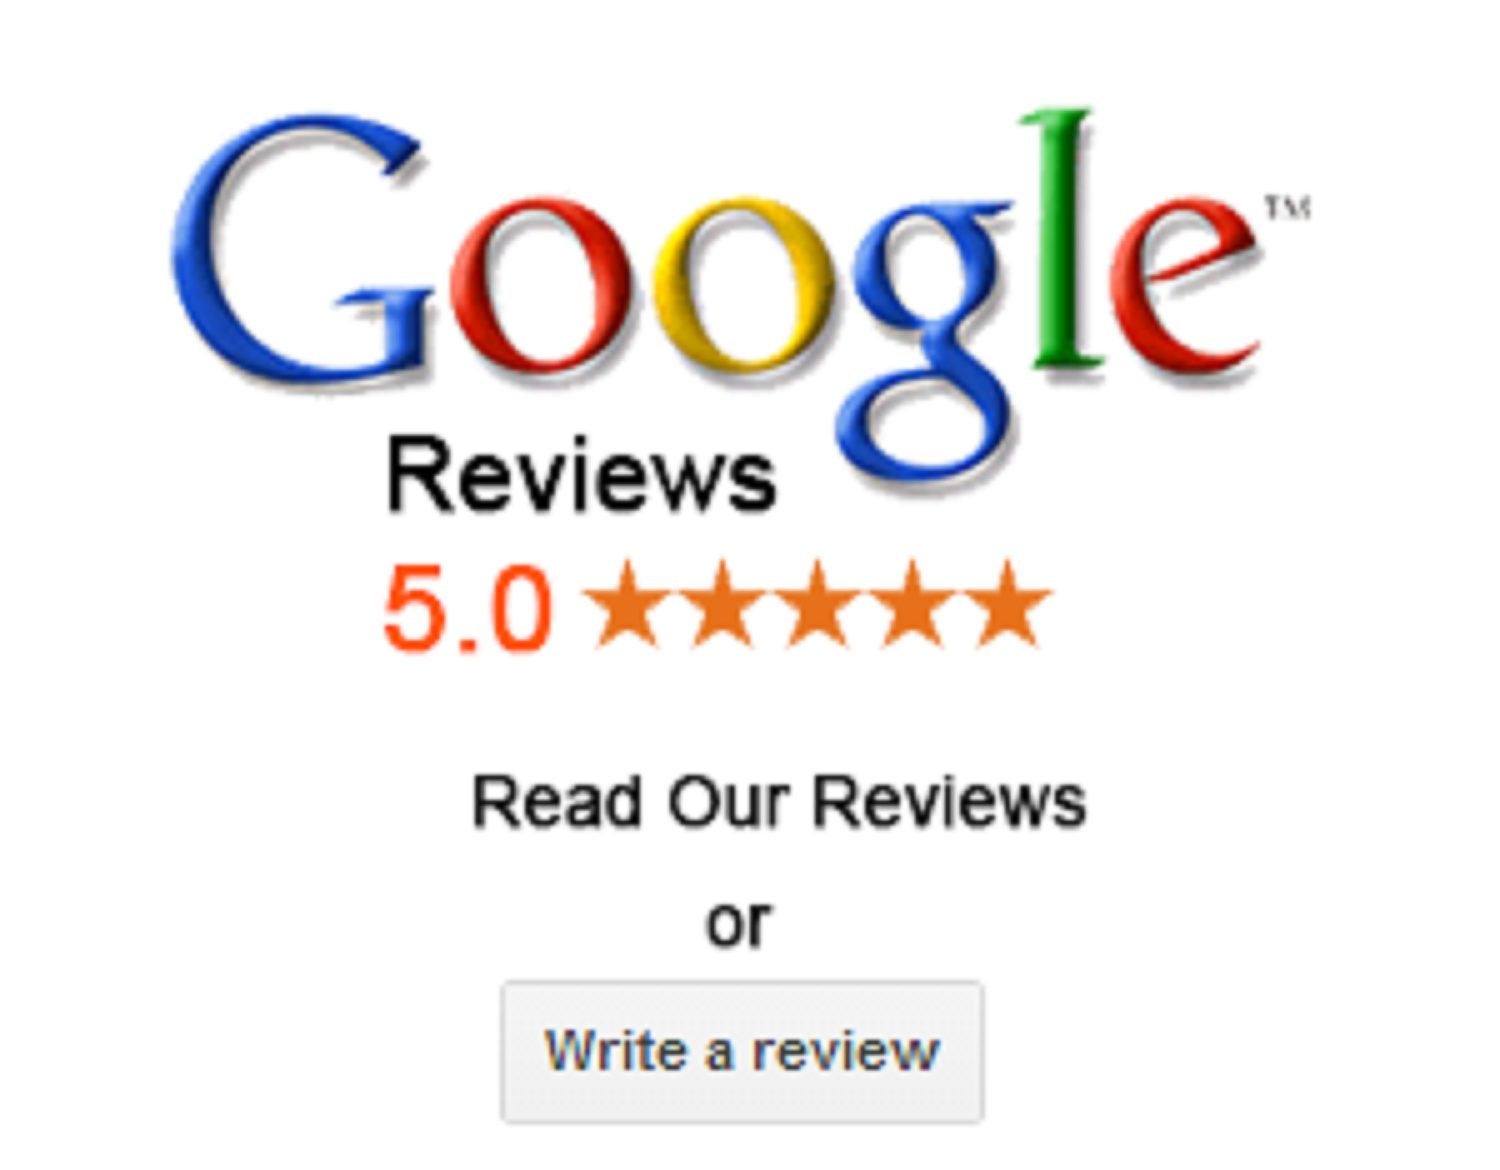 Get 3 Spectacular Google Reviews + 1 FREE That STICKS From Real Humans